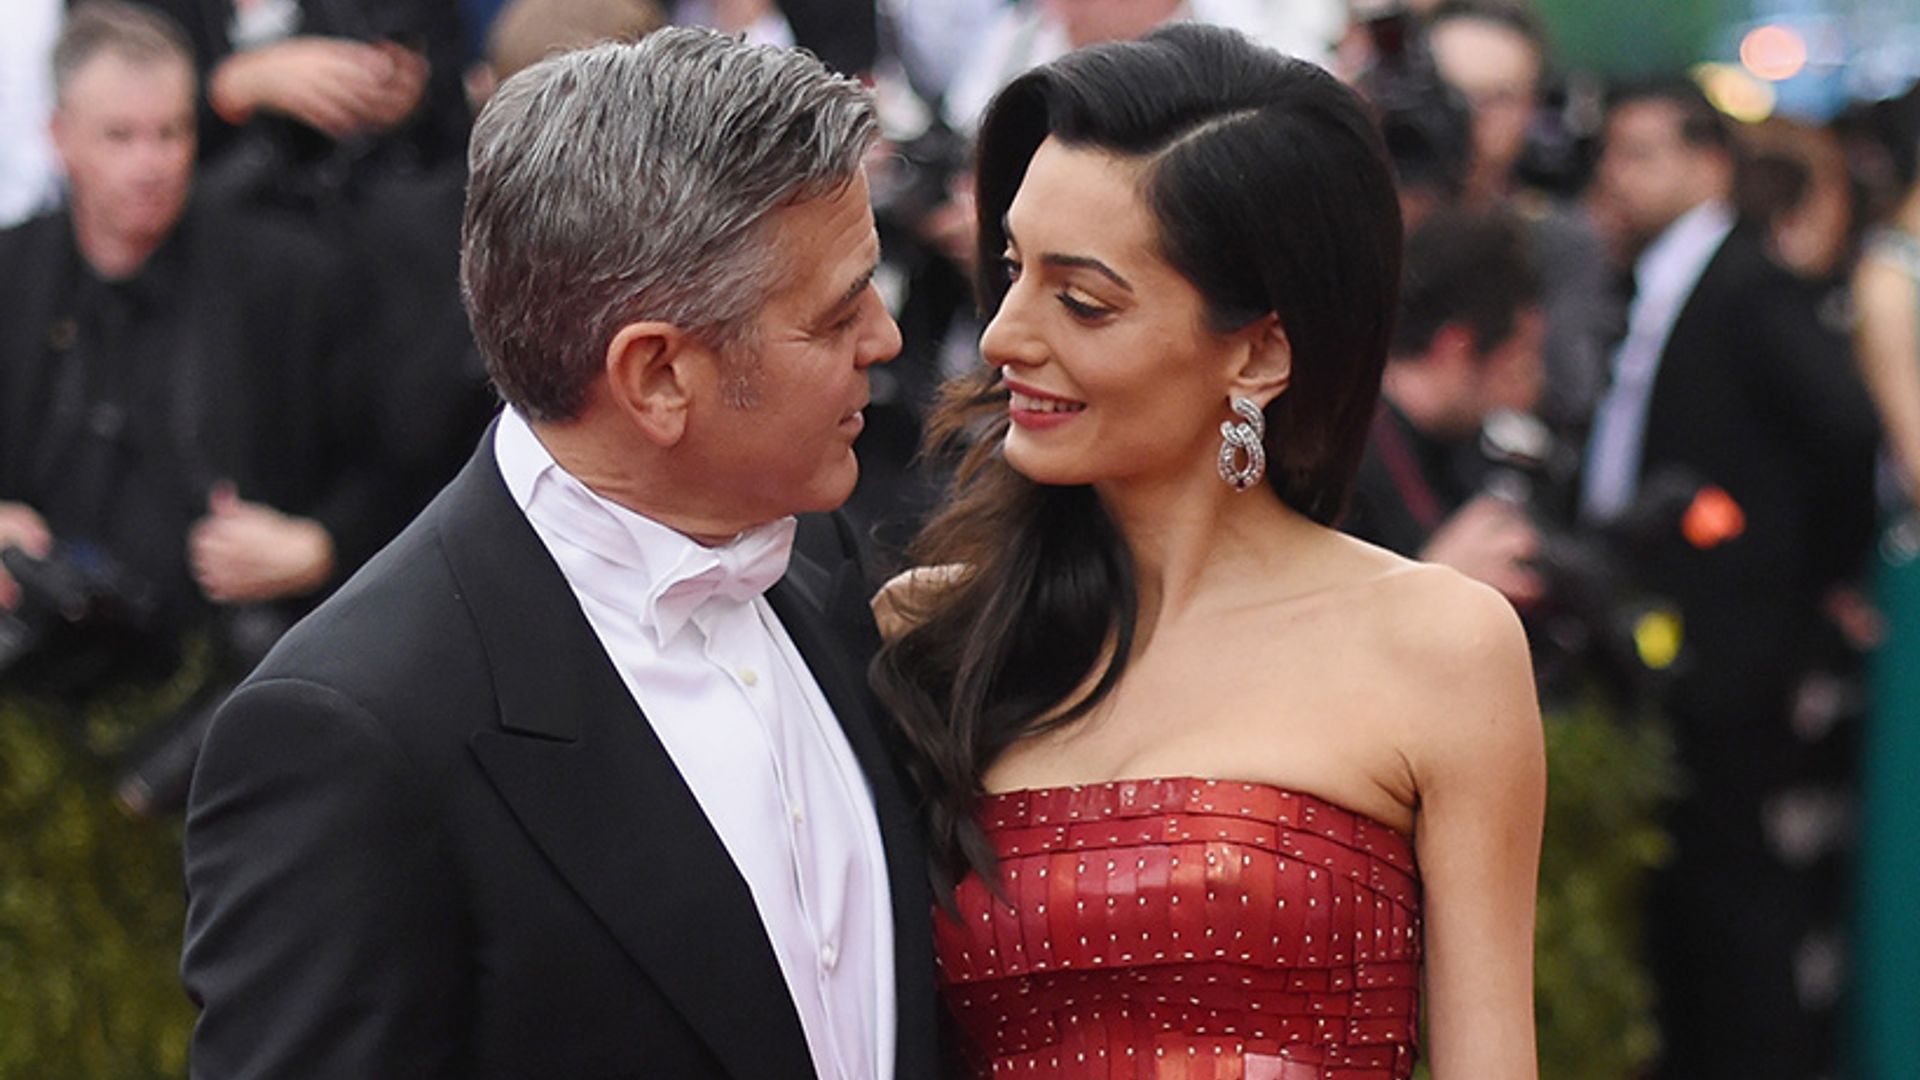 George and Amal Clooney’s baby gifts - find out what friends and family gave their newborn twins!